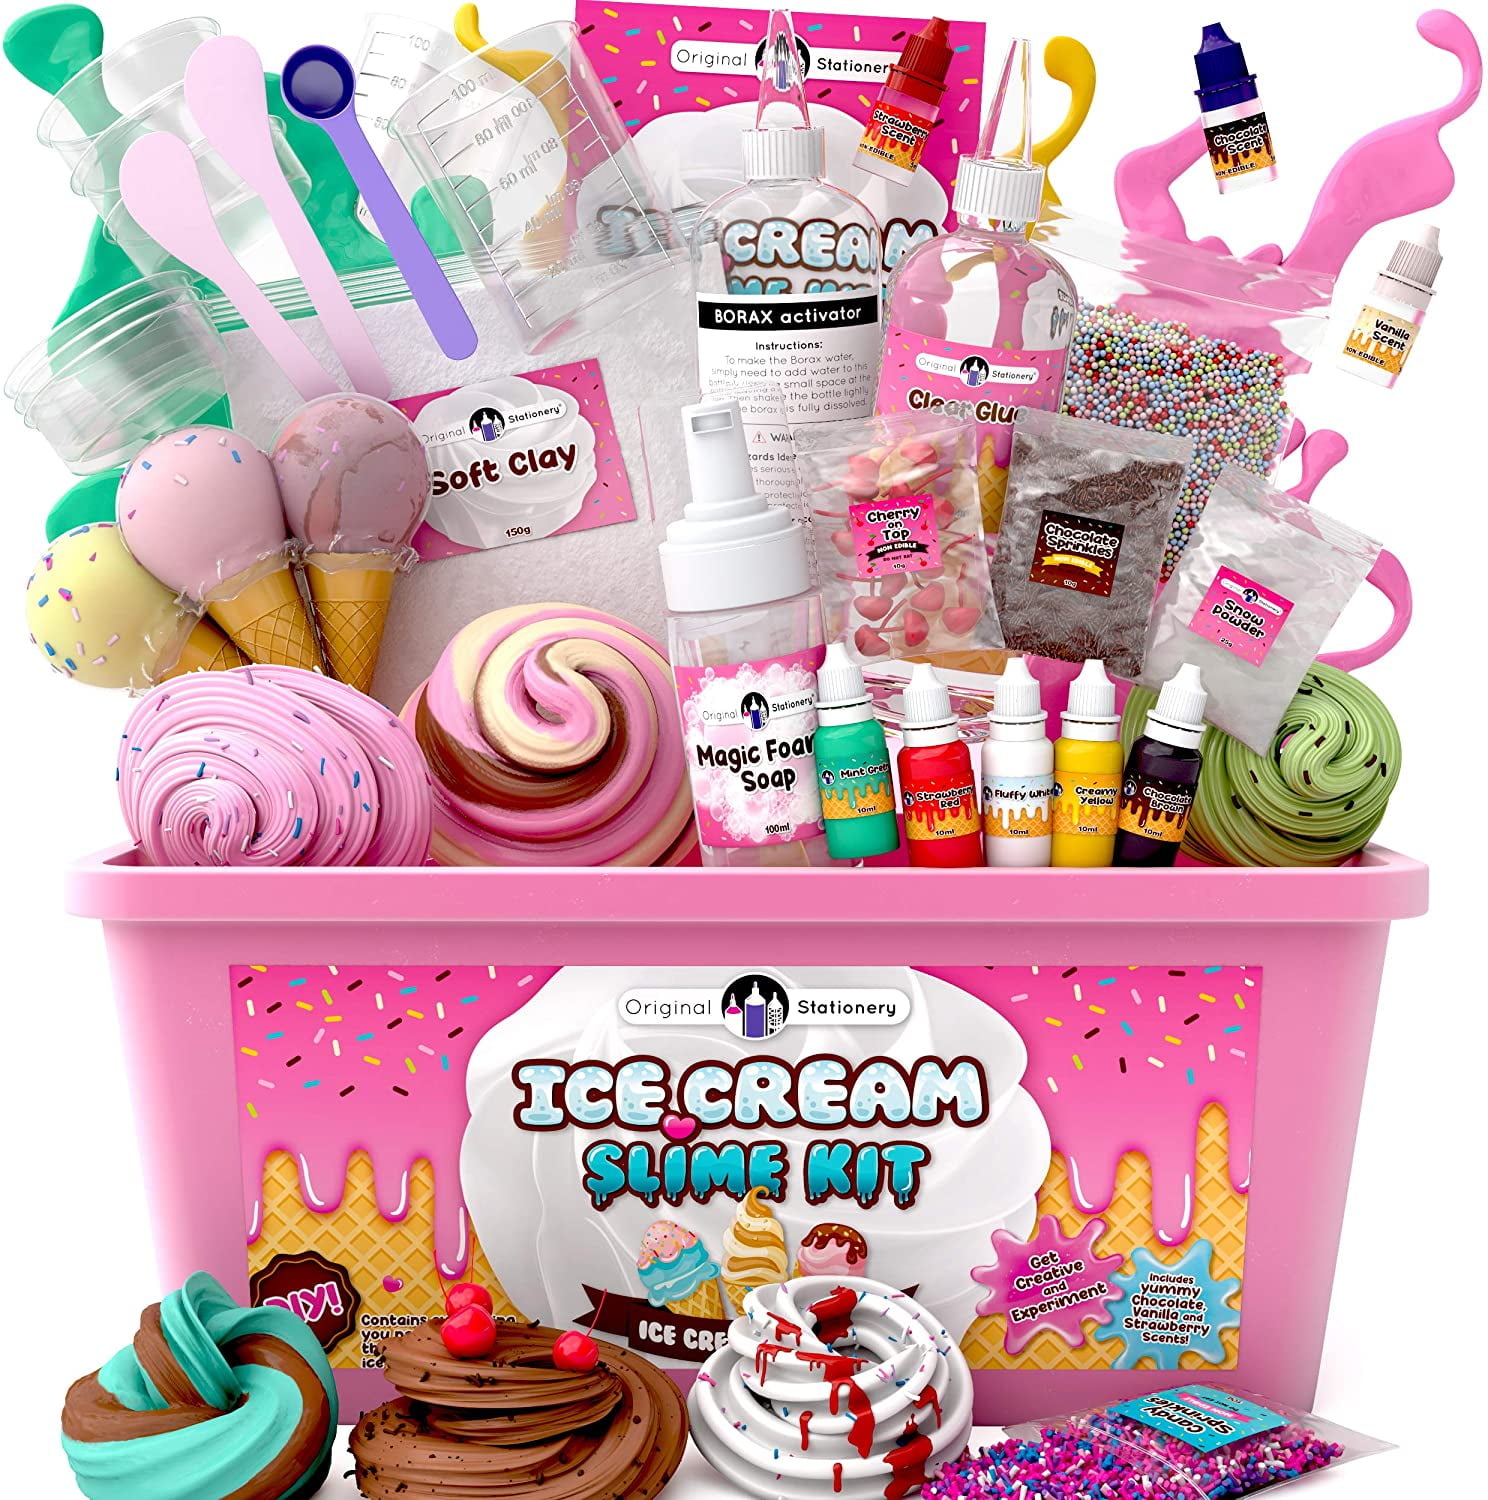 Original Stationery Fluffy Slime Kit for Girls Everything in One Box to Make Ice